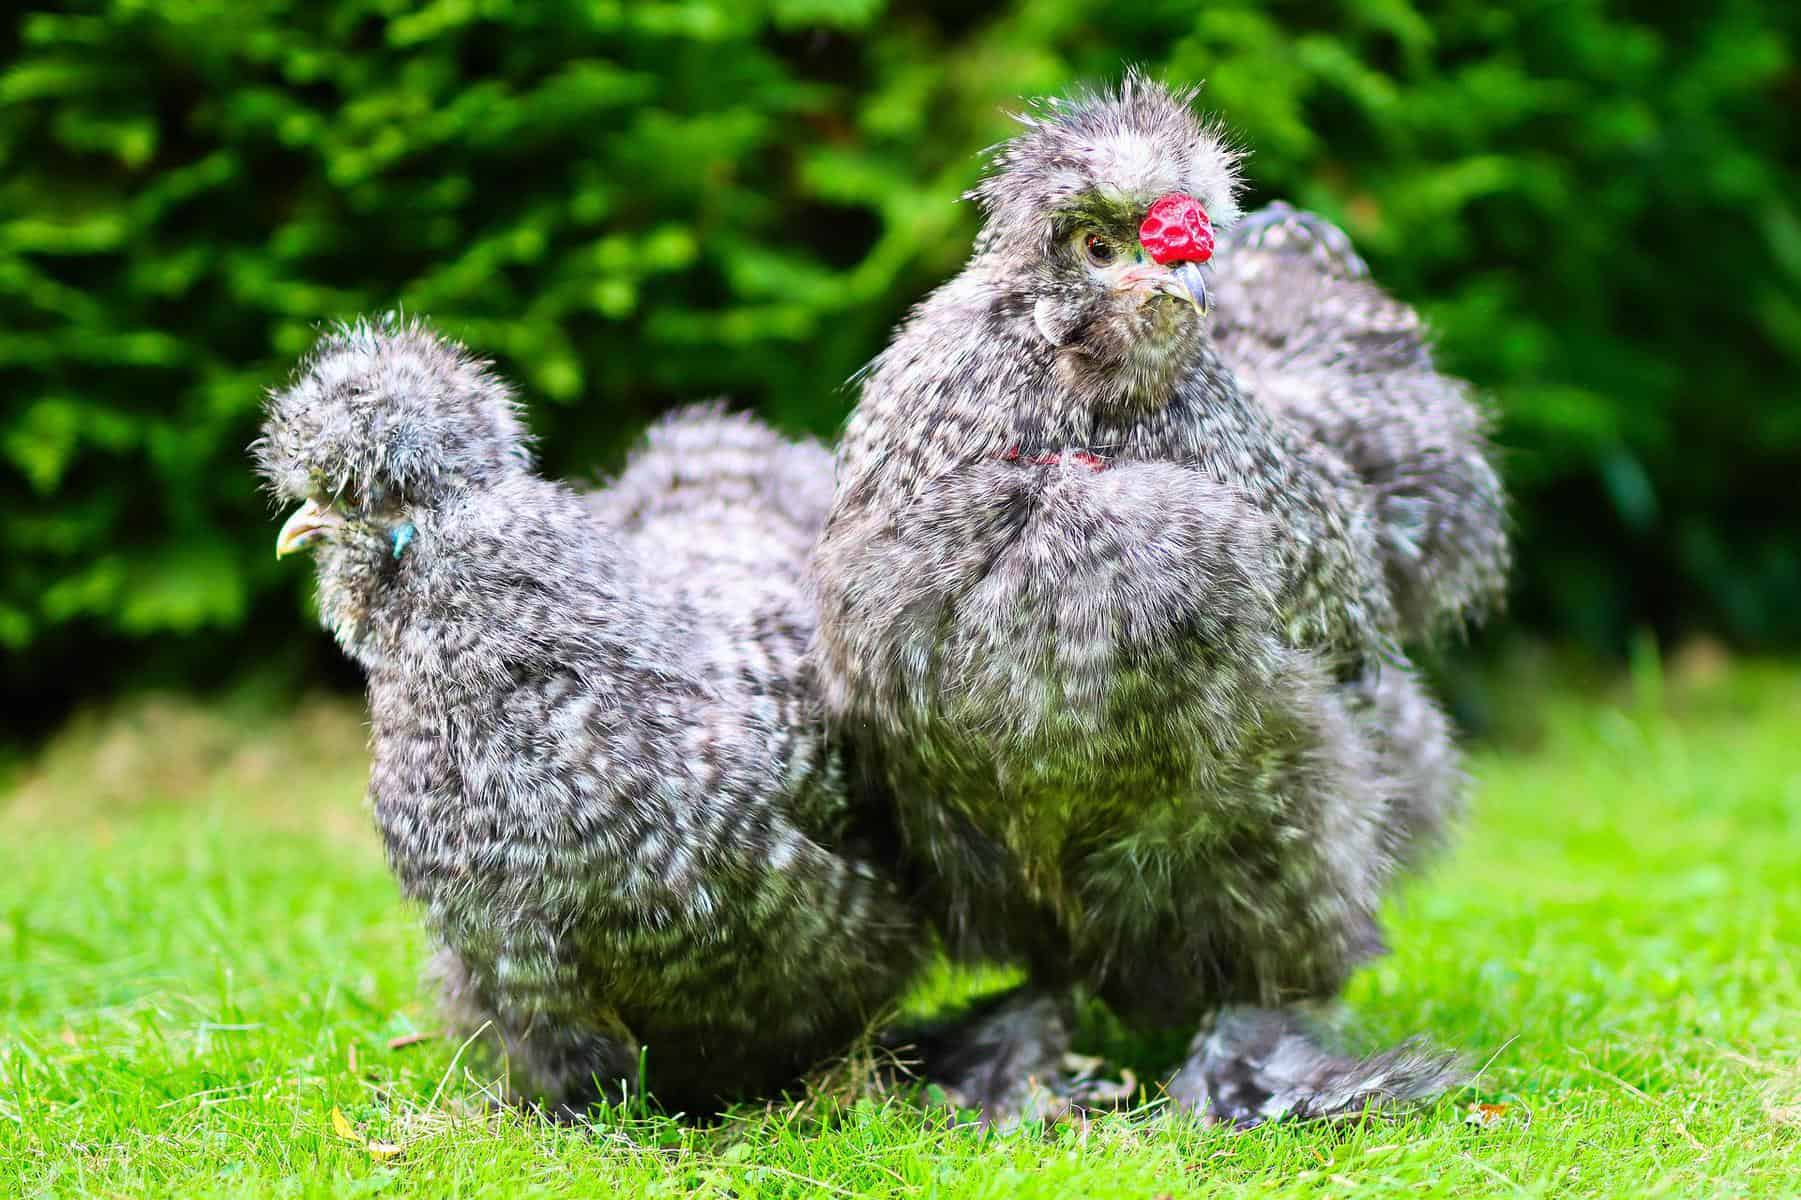 Silkie Chicken Colors